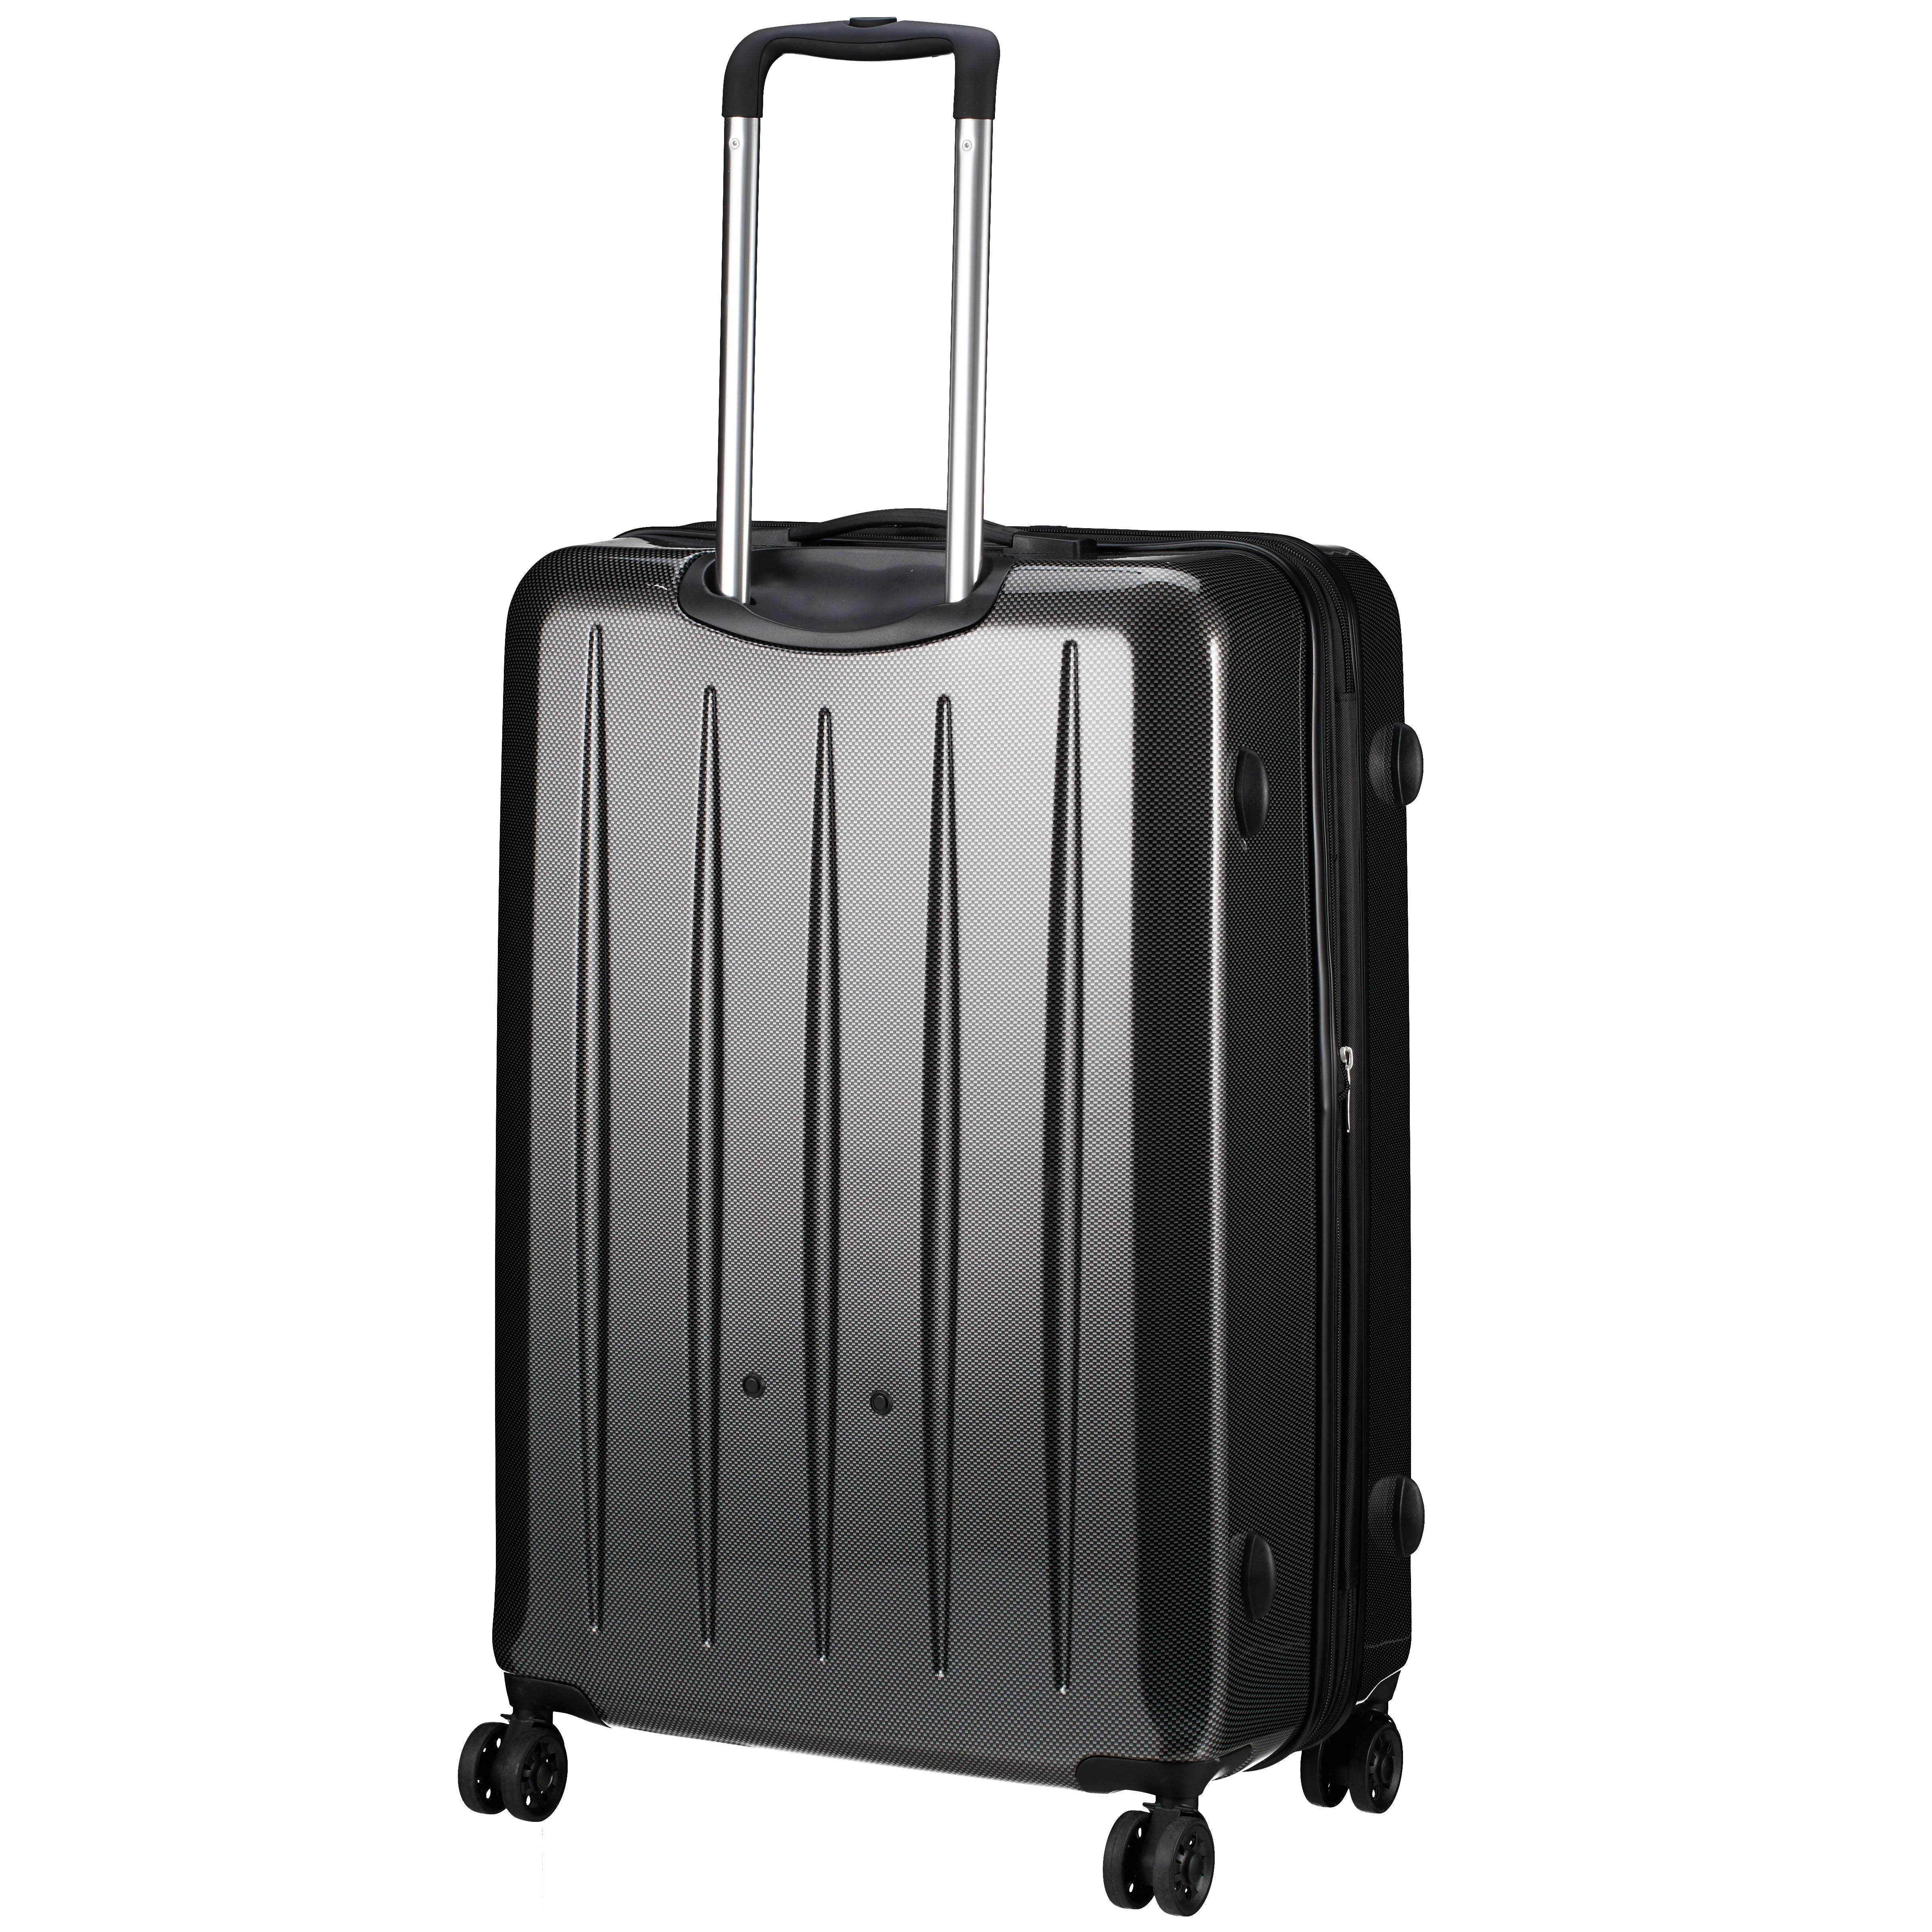 Check In London 2.0 trolley 4 roues 75 cm - blanc